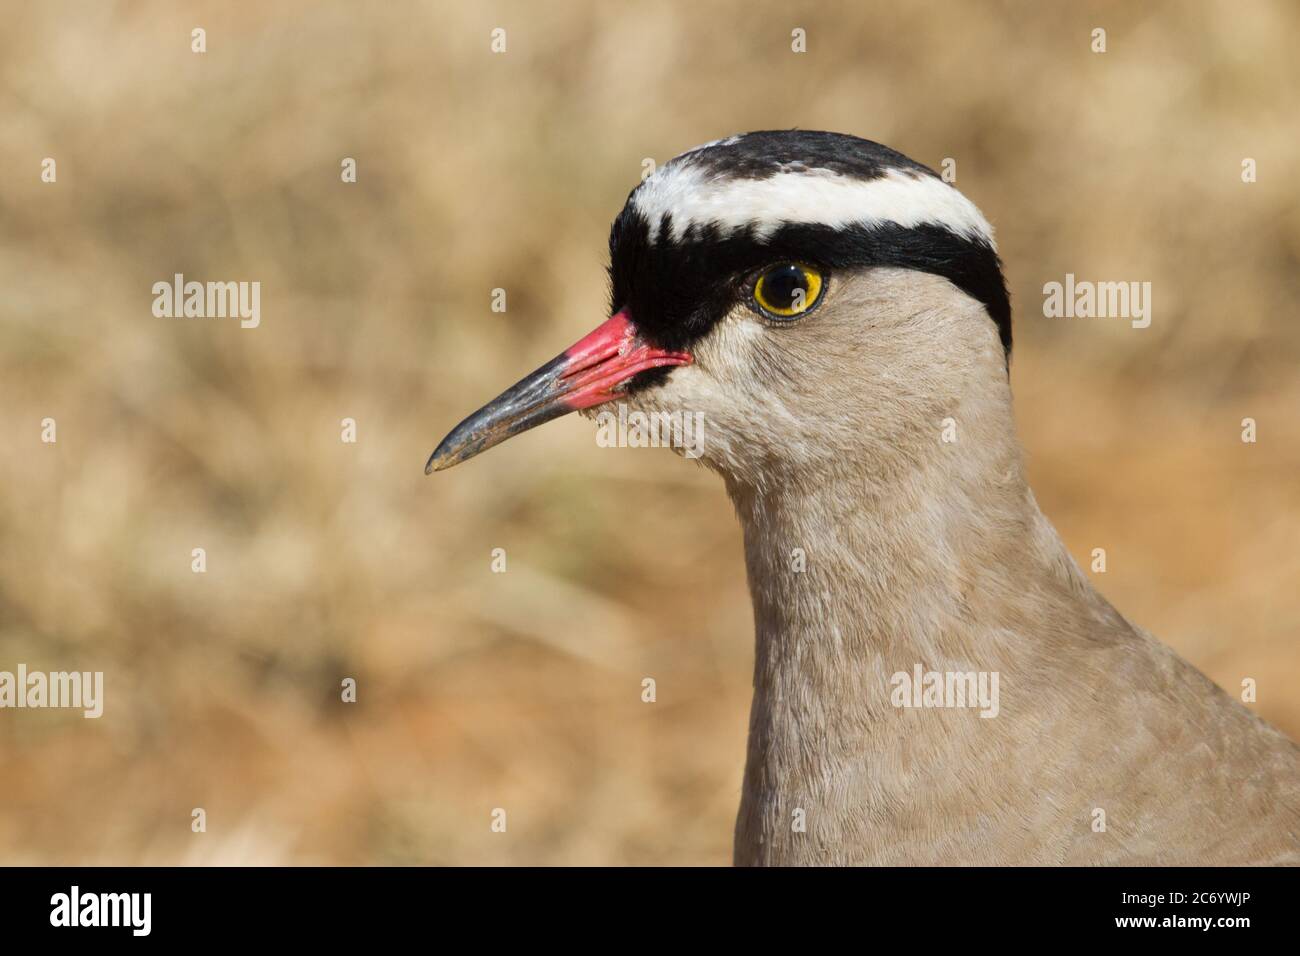 Crowned Lapwing (Vanellus coronatus) closeup head profile showing eye and beak details in South Africa with bokeh background Stock Photo